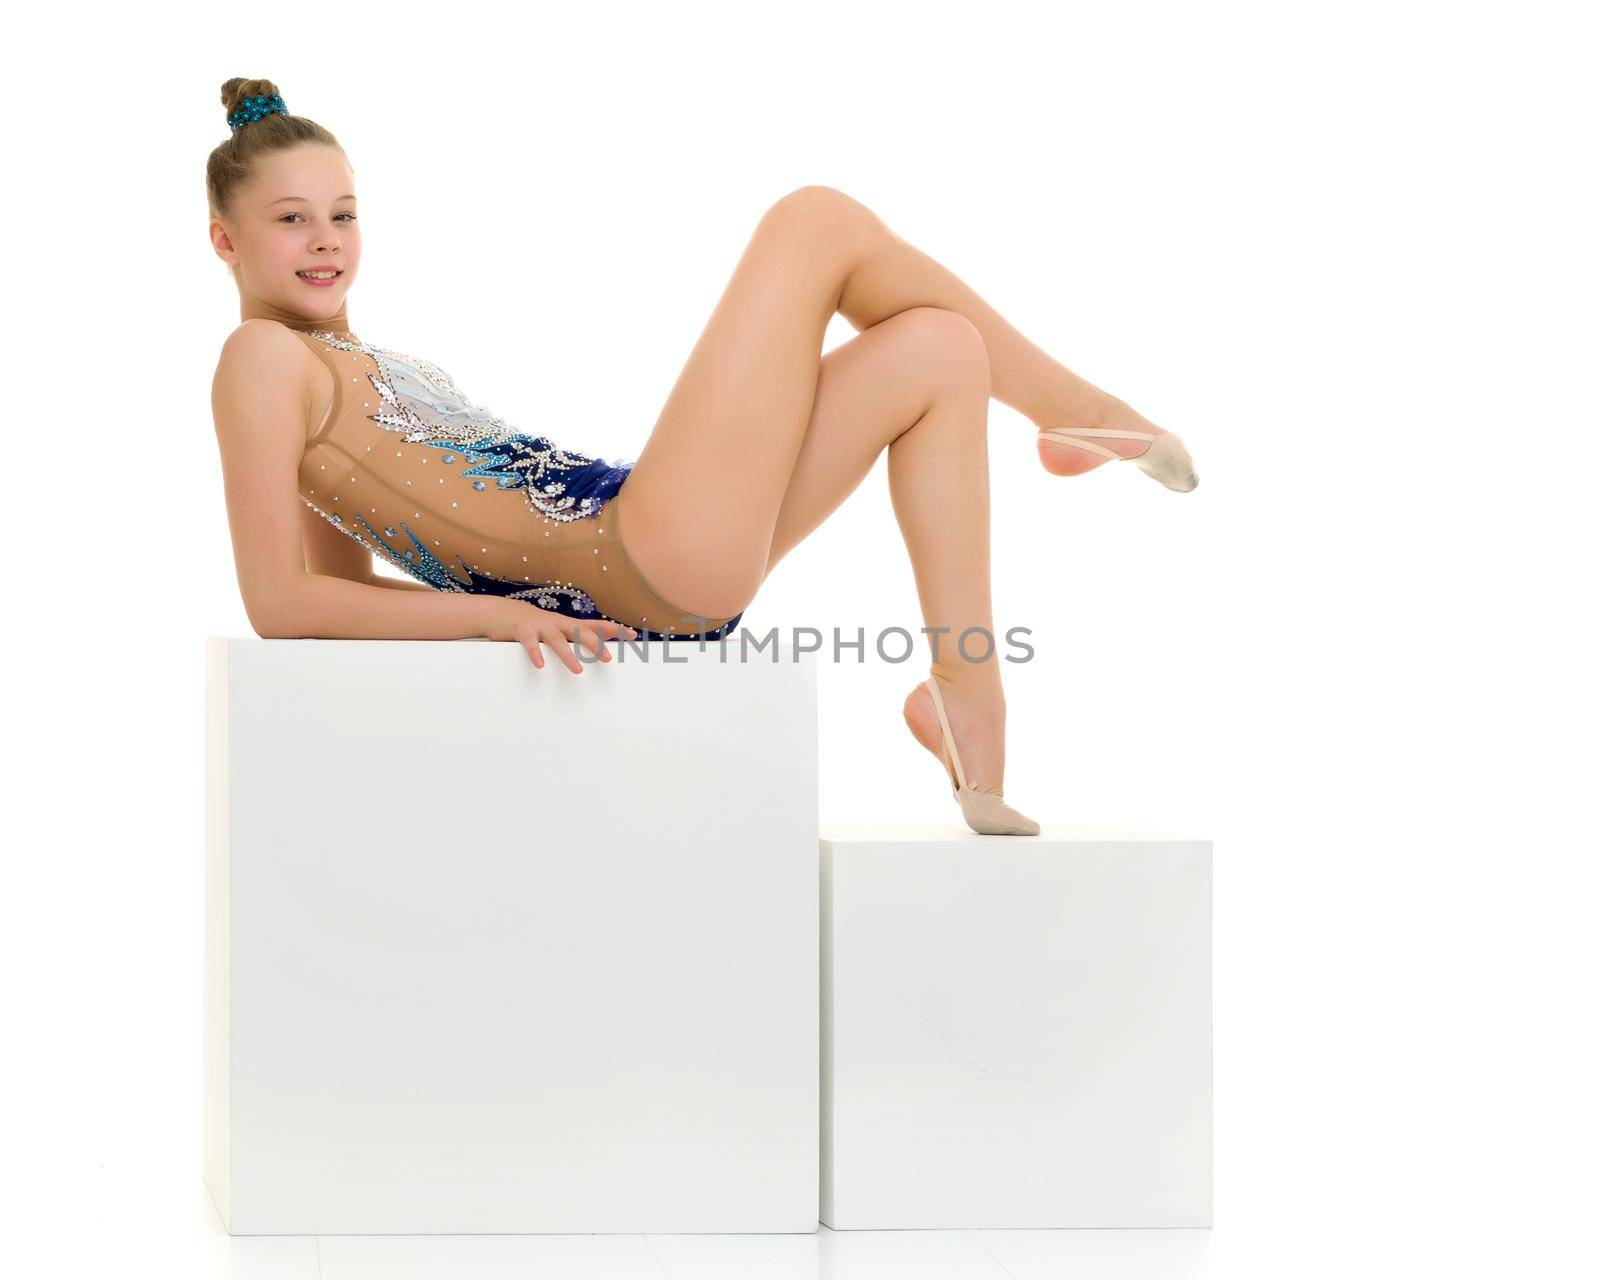 Elegant little gymnast girl in a beautiful sports swimsuit, on the Big White Cube in the studio performs a gymnastic element. Separately on a white background.